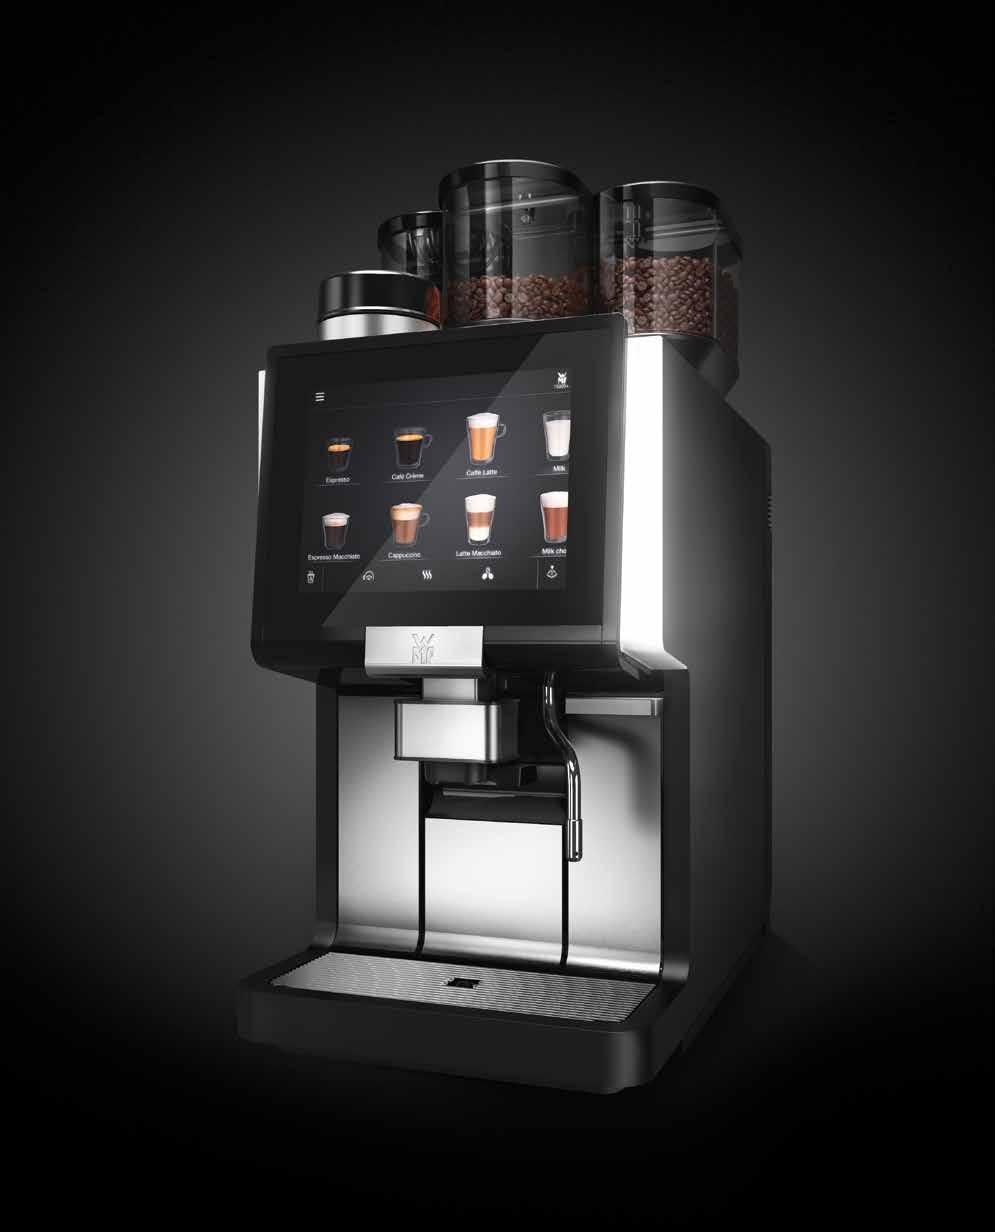 What s more, it can be tailored to meet your needs and satisfy your customers preferences. The is the versatile solution for providing premium coffee specialities.